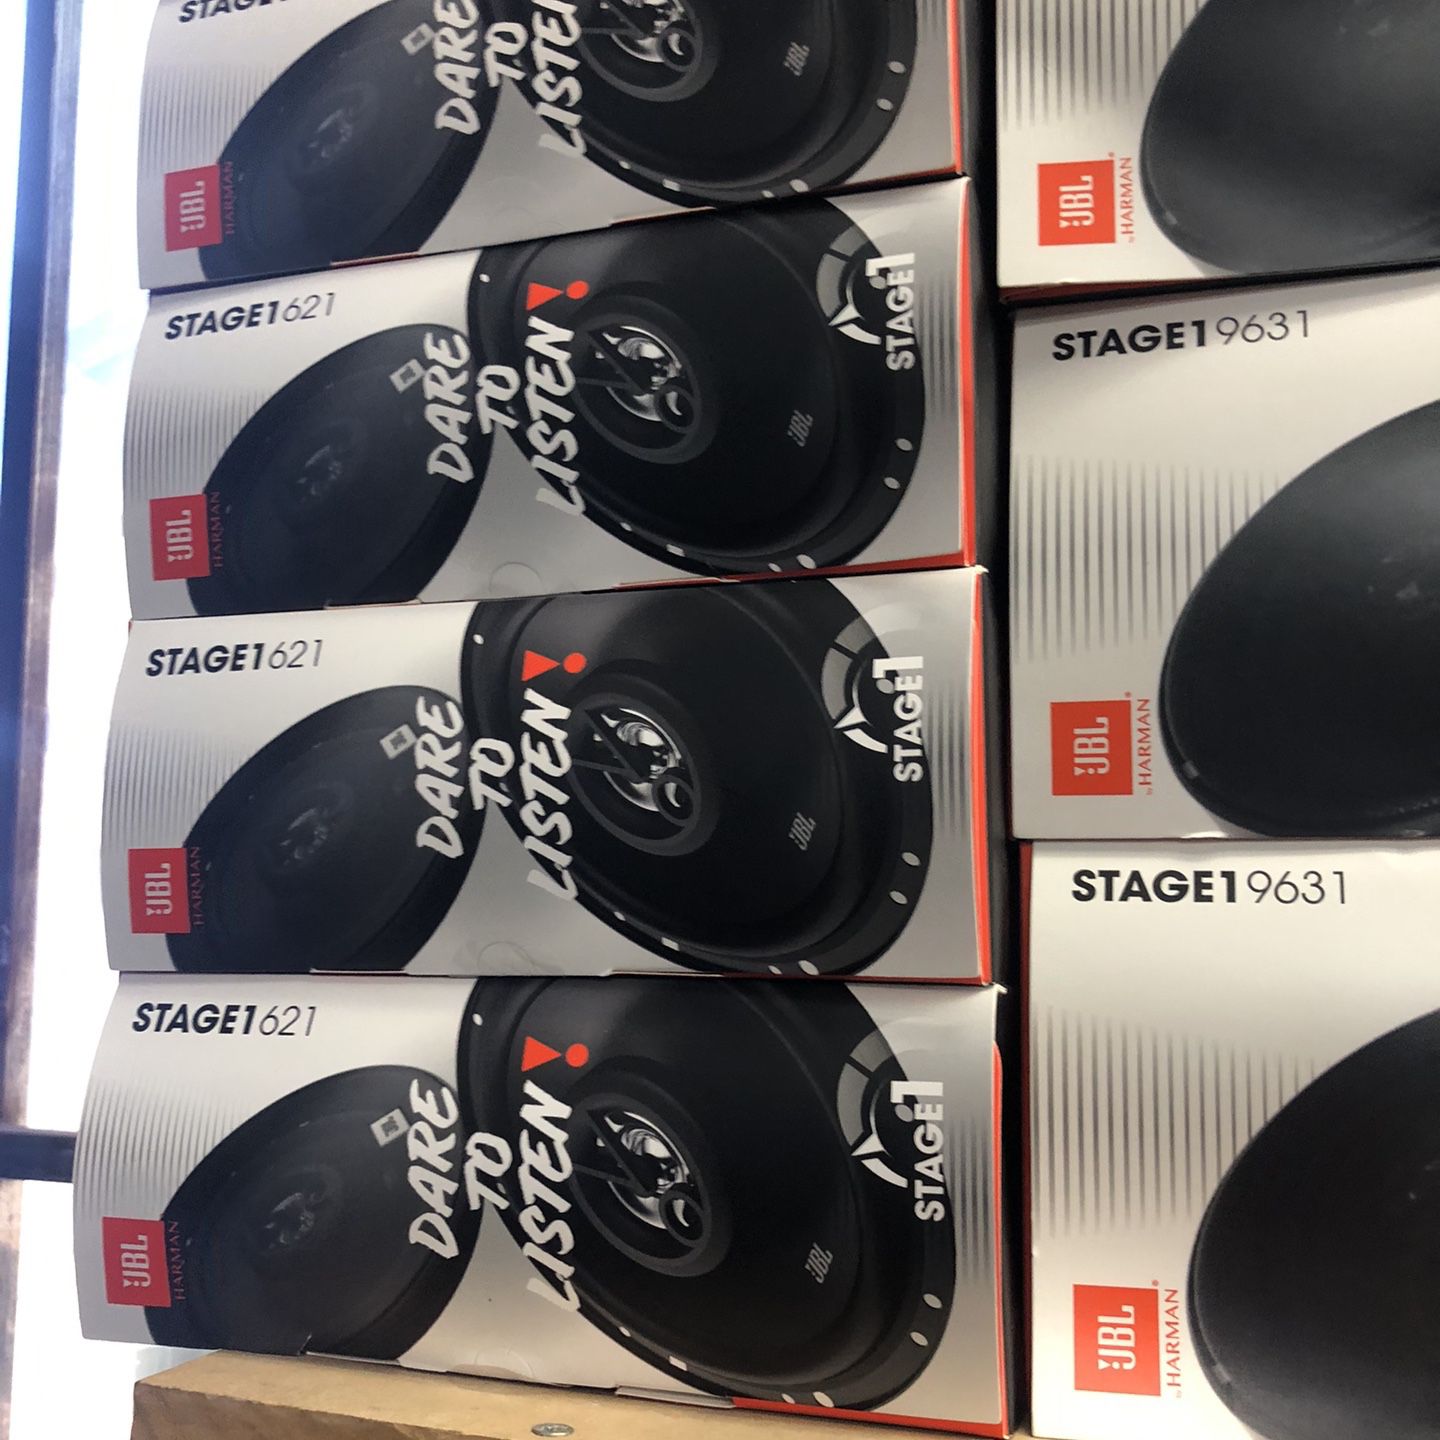 Jbl 6x9 On Sale Today For 59.99 Come And Get The Best Prices 